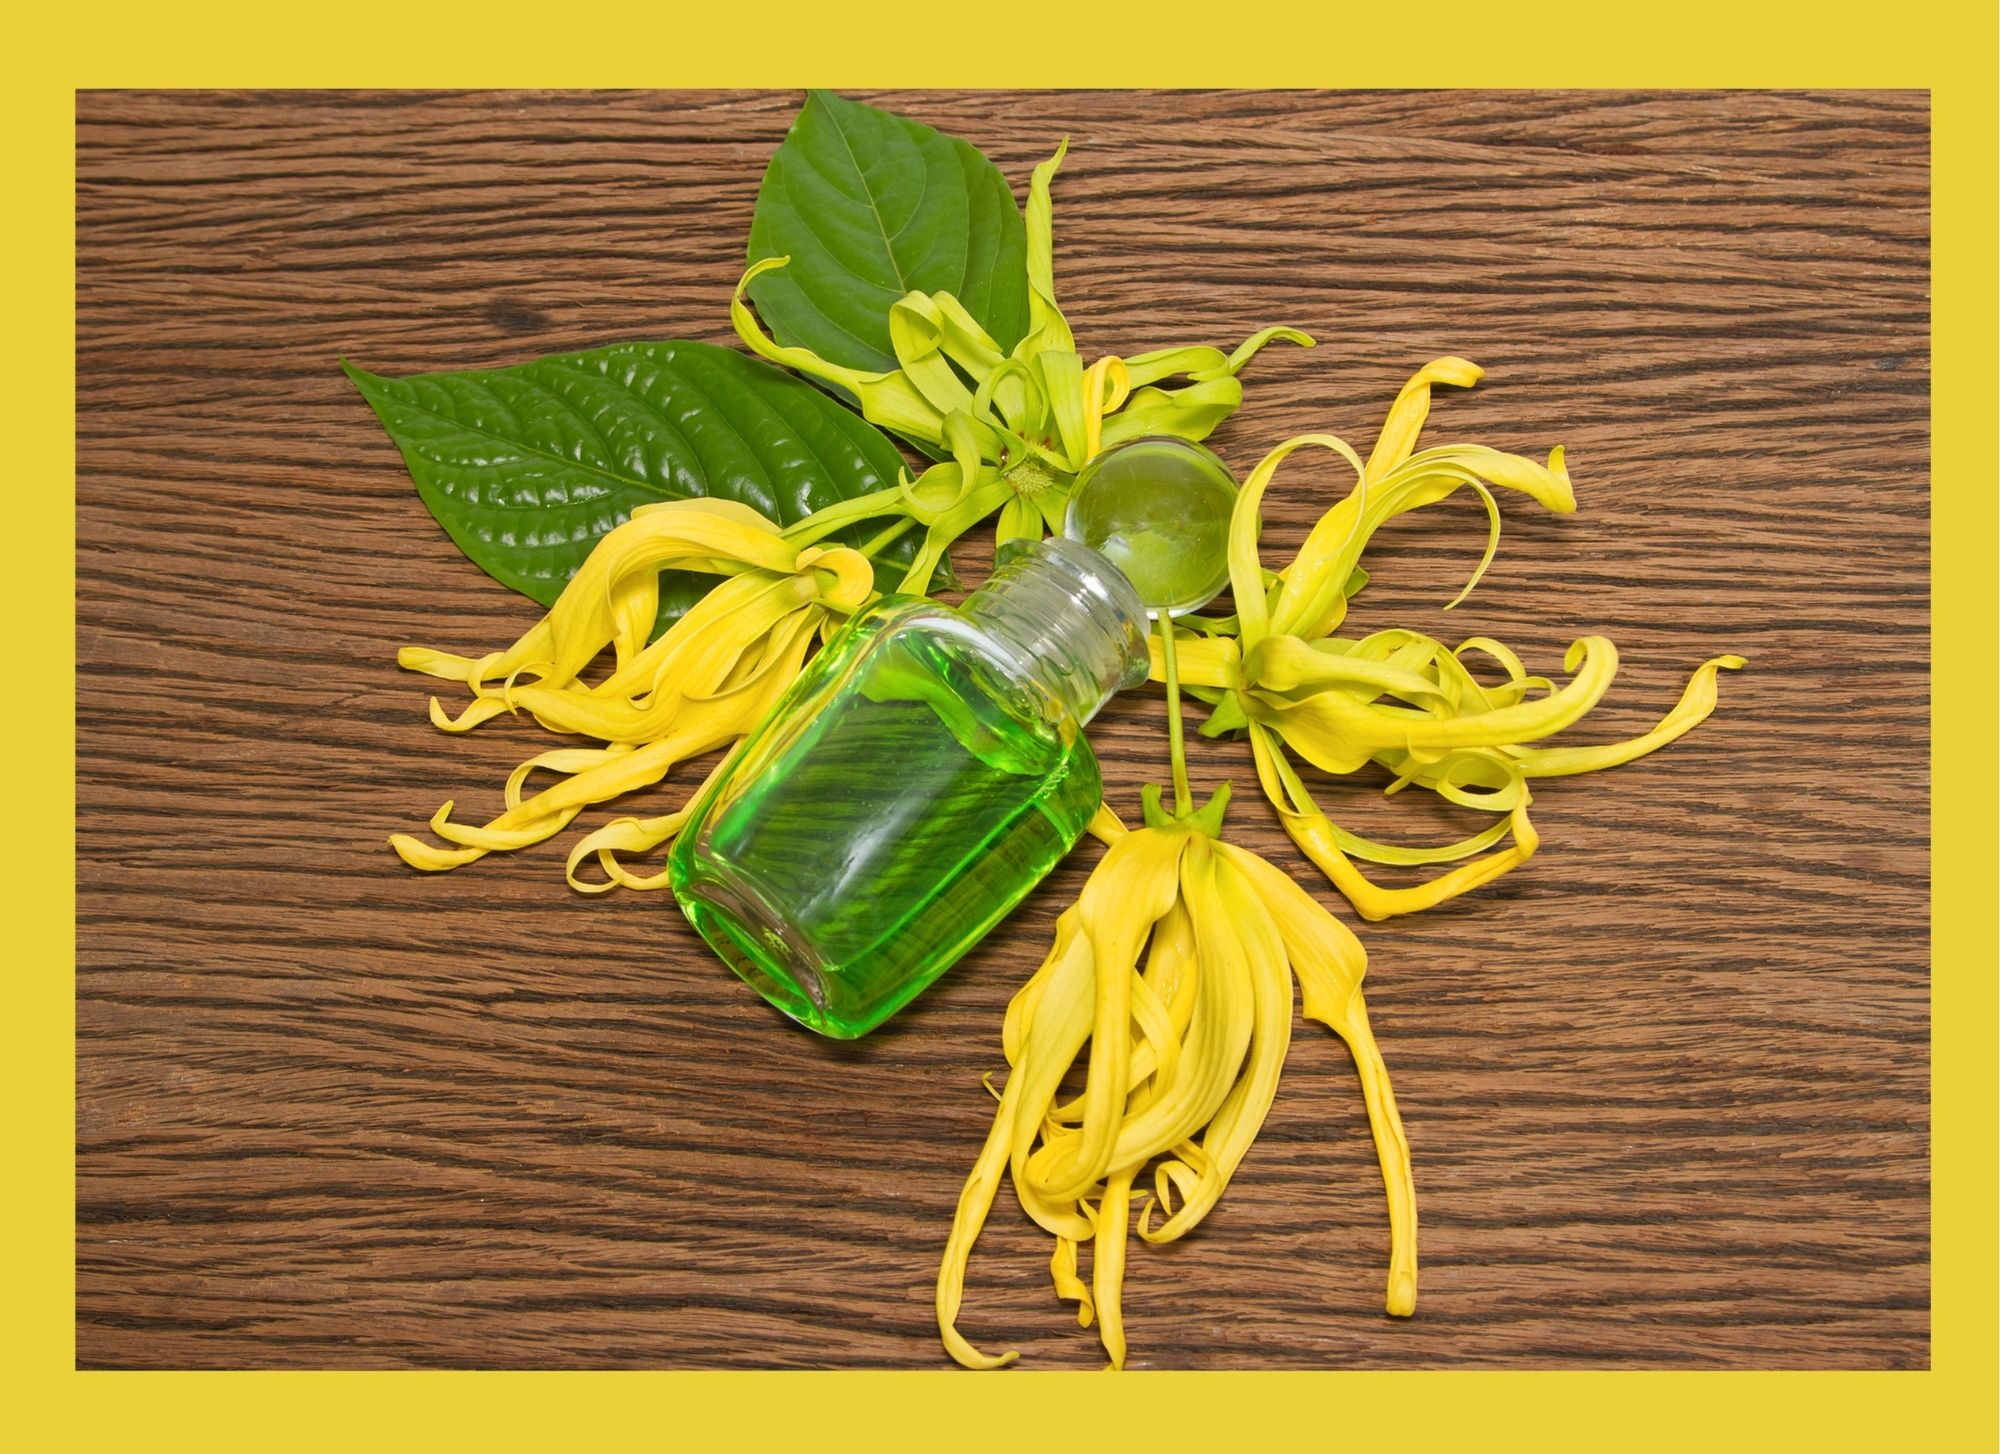 Ylang-Ylang Essential Oil Benefits | Uses, Side Effects